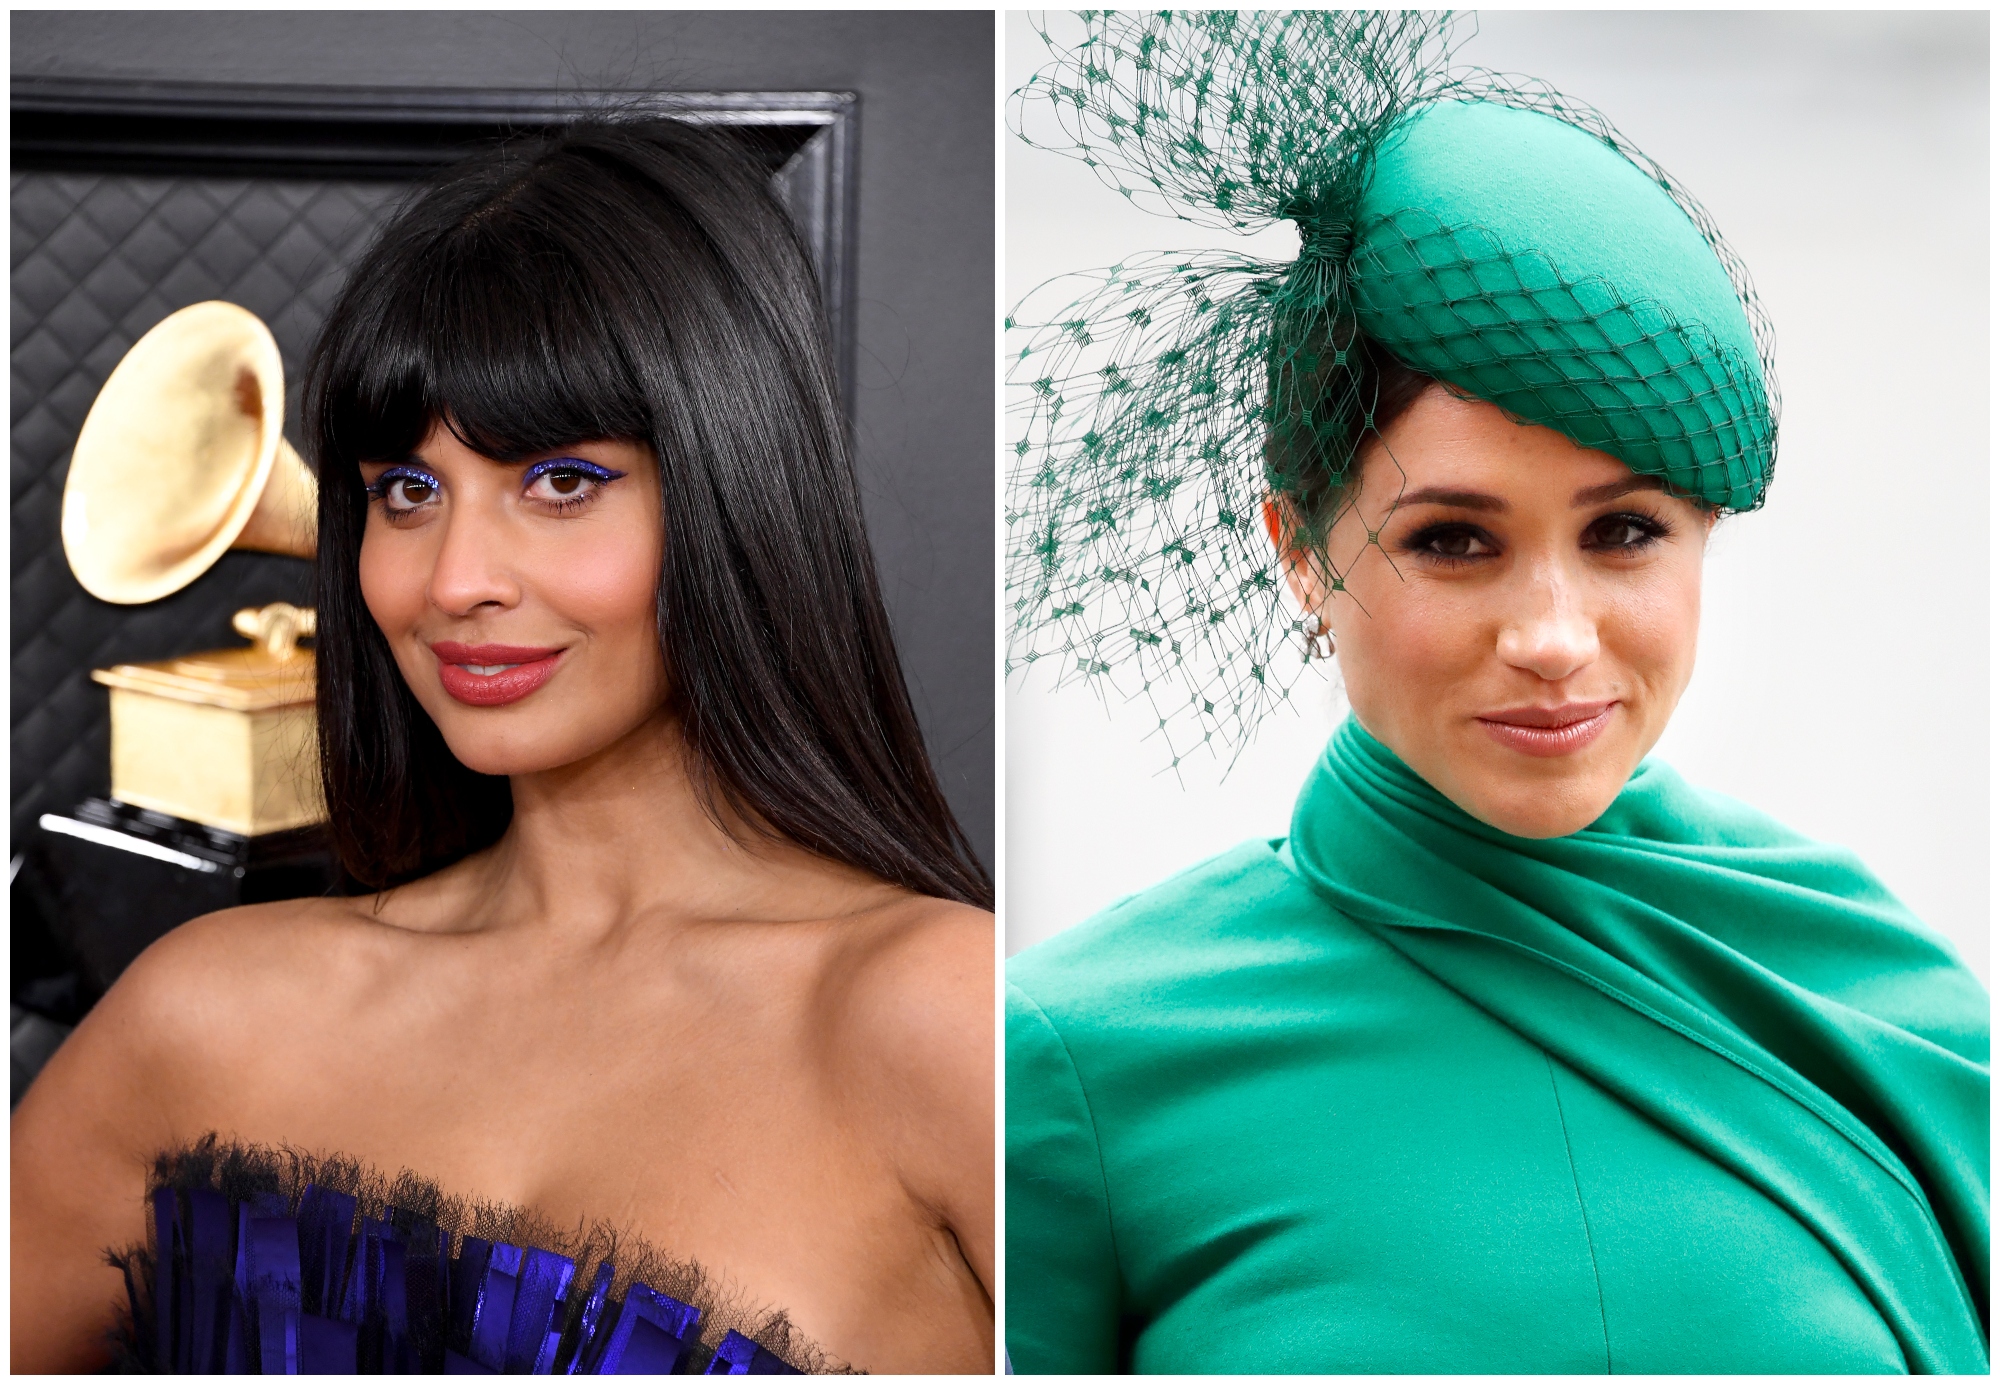 Jameela Jamil Says She’s Not Friends With Meghan Markle: ‘I’ve Met This Woman Once Ever’